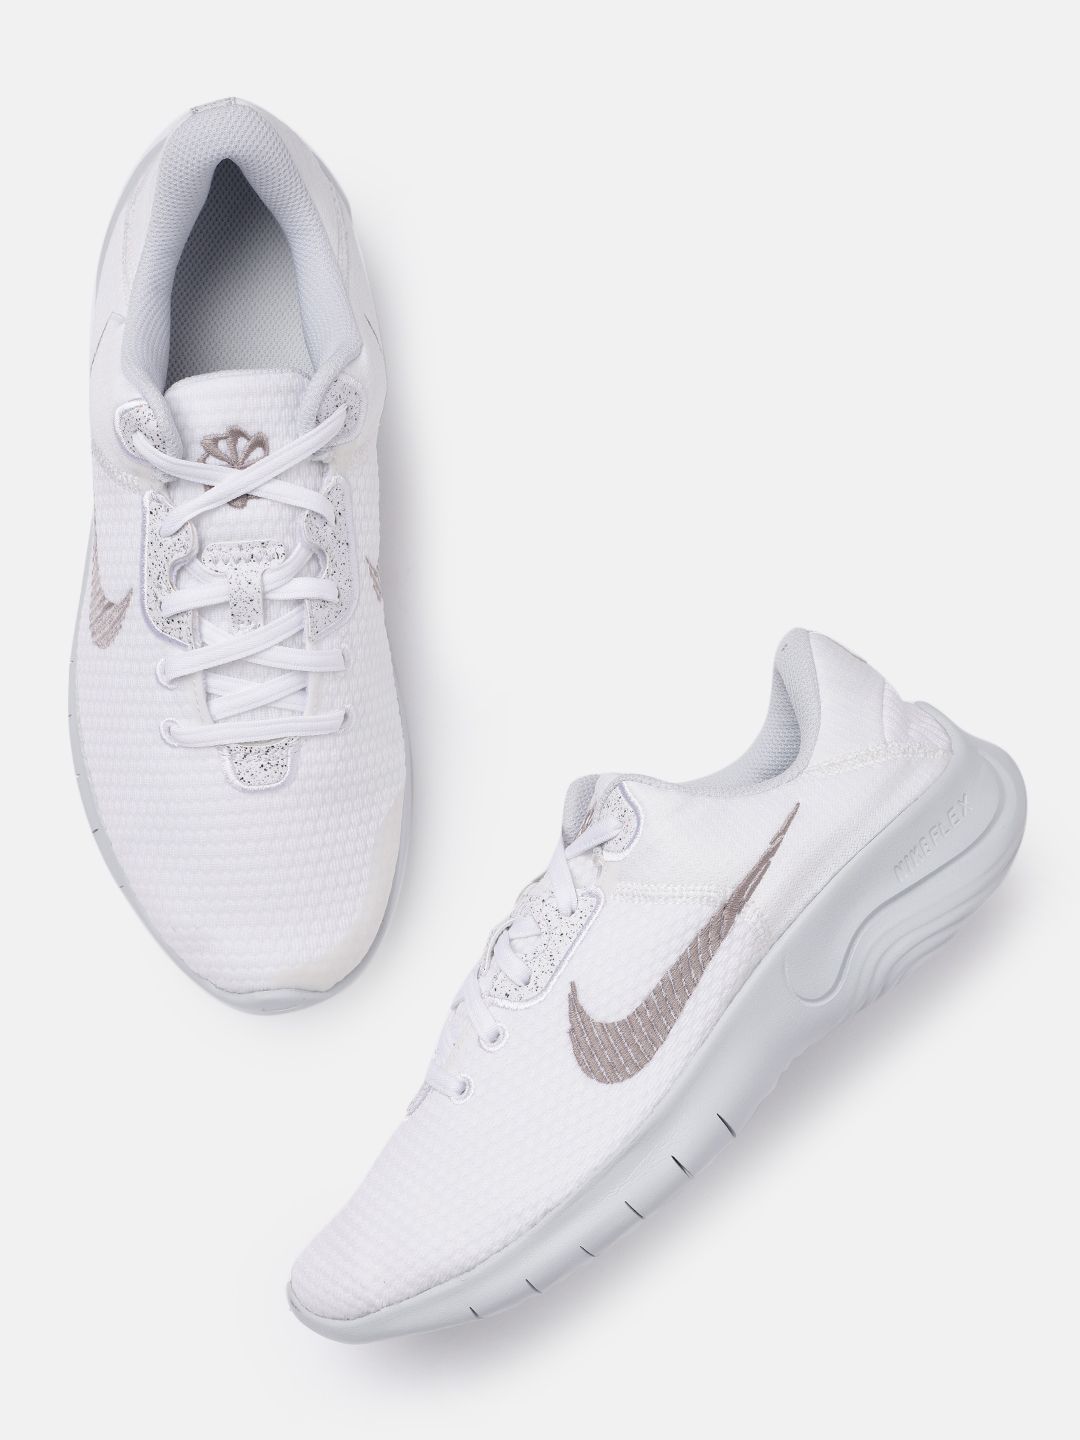 Nike Women White FLEX EXPERIENCE Running Shoes Price in India